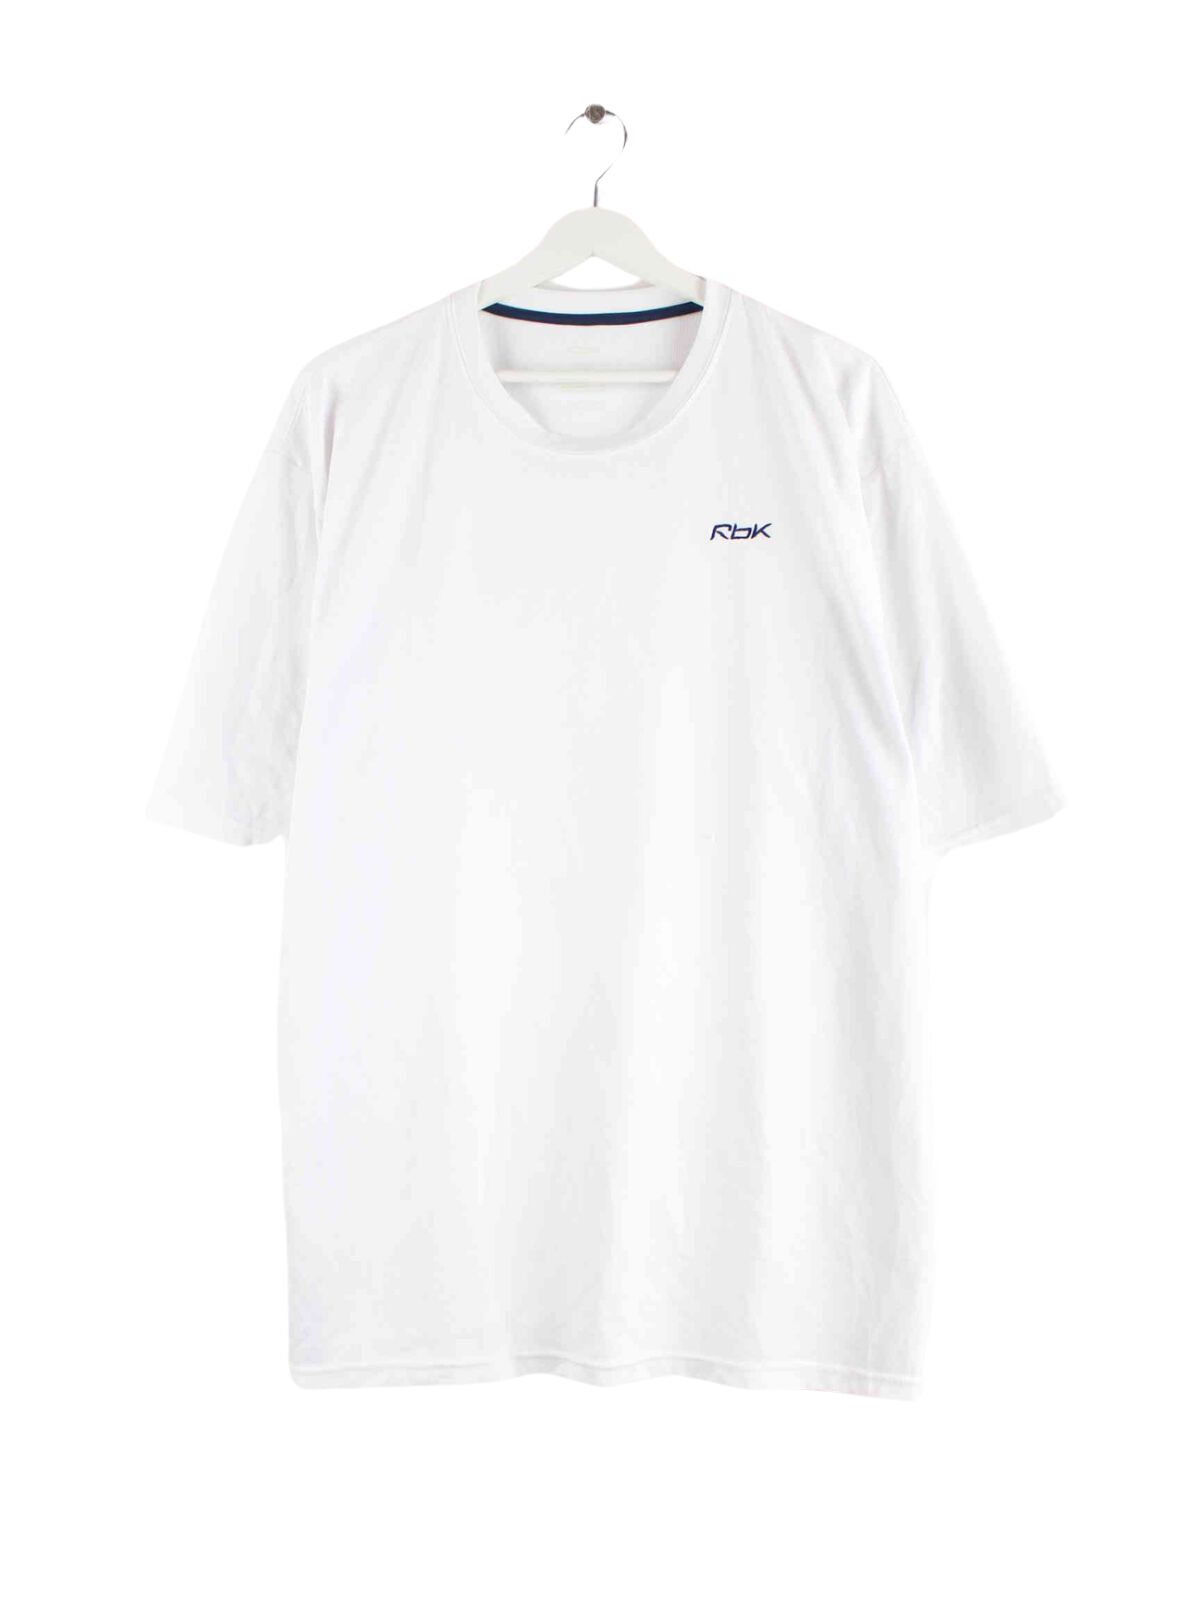 Reebok Embroidered T-Shirt Weiß XL (front image)